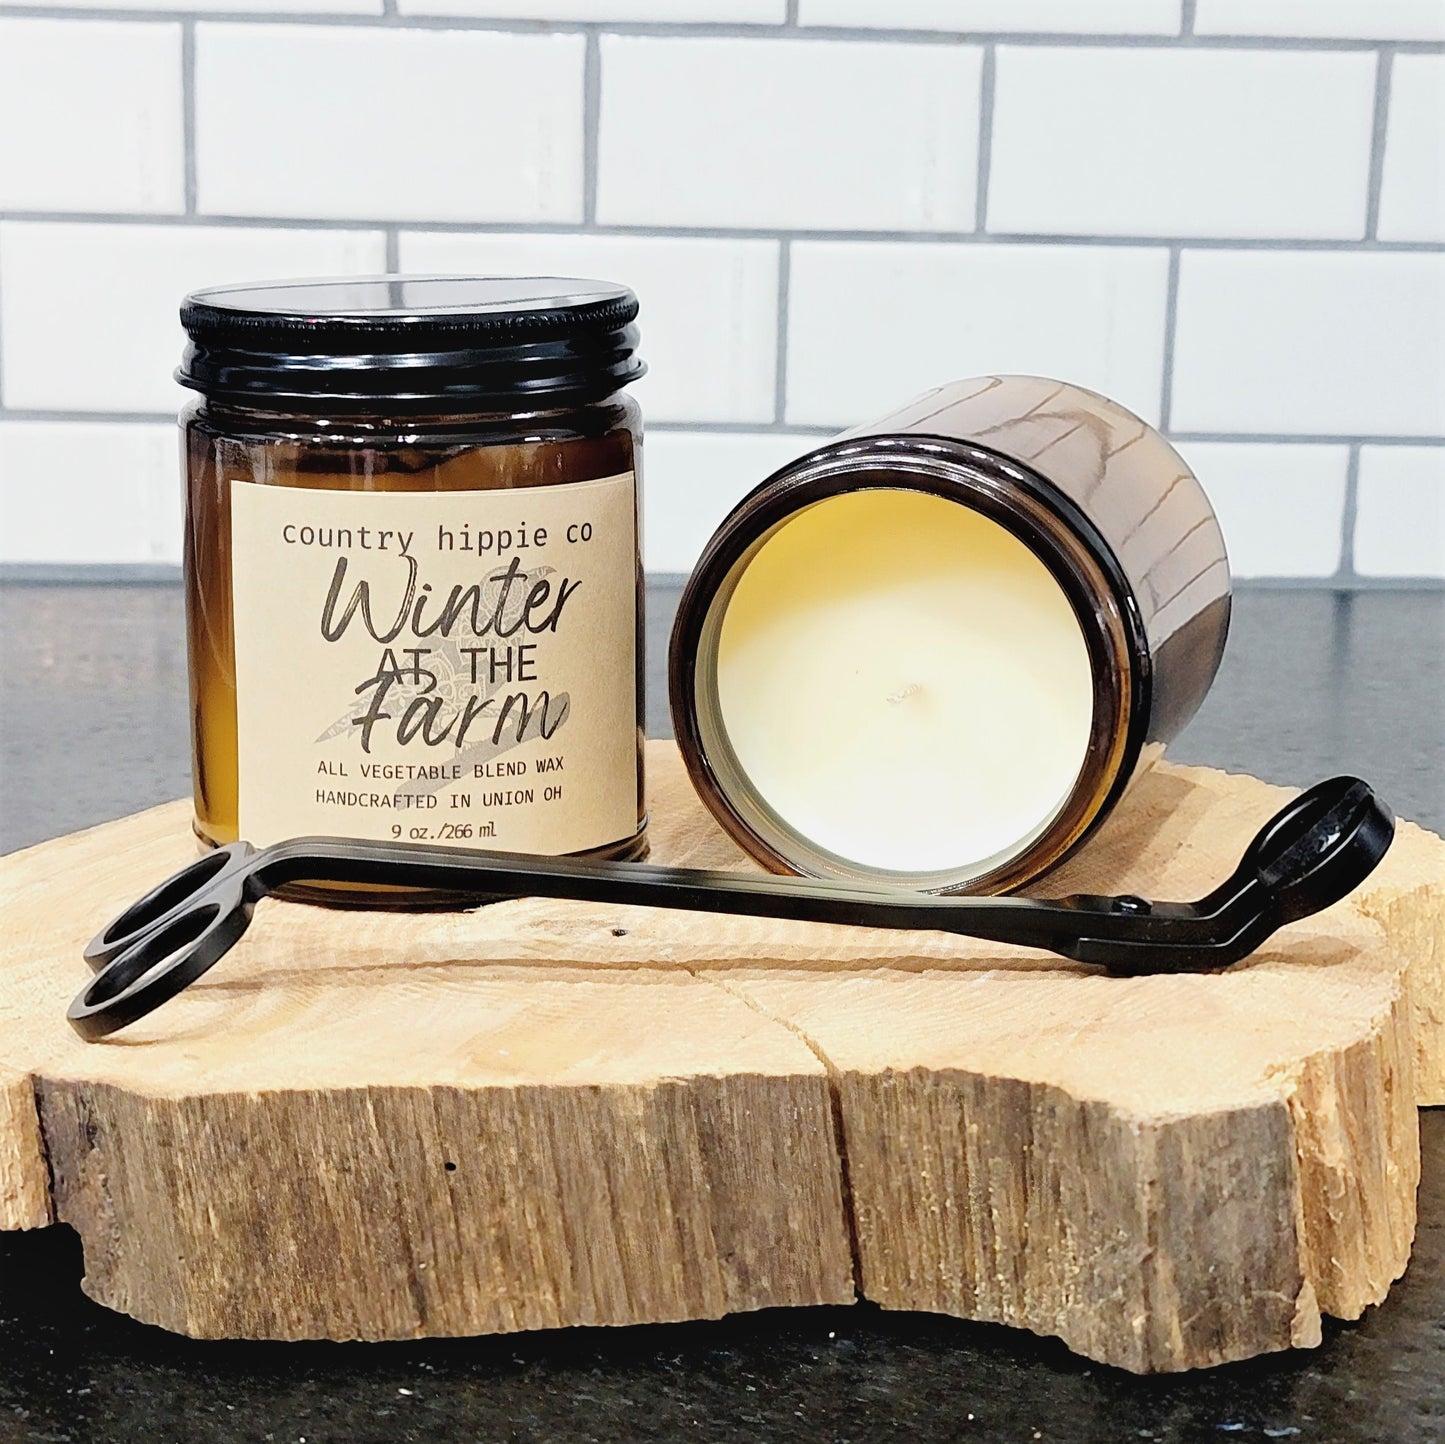 Winter At The Farm Apothecary-inspired Jar  Candle 9 oz.